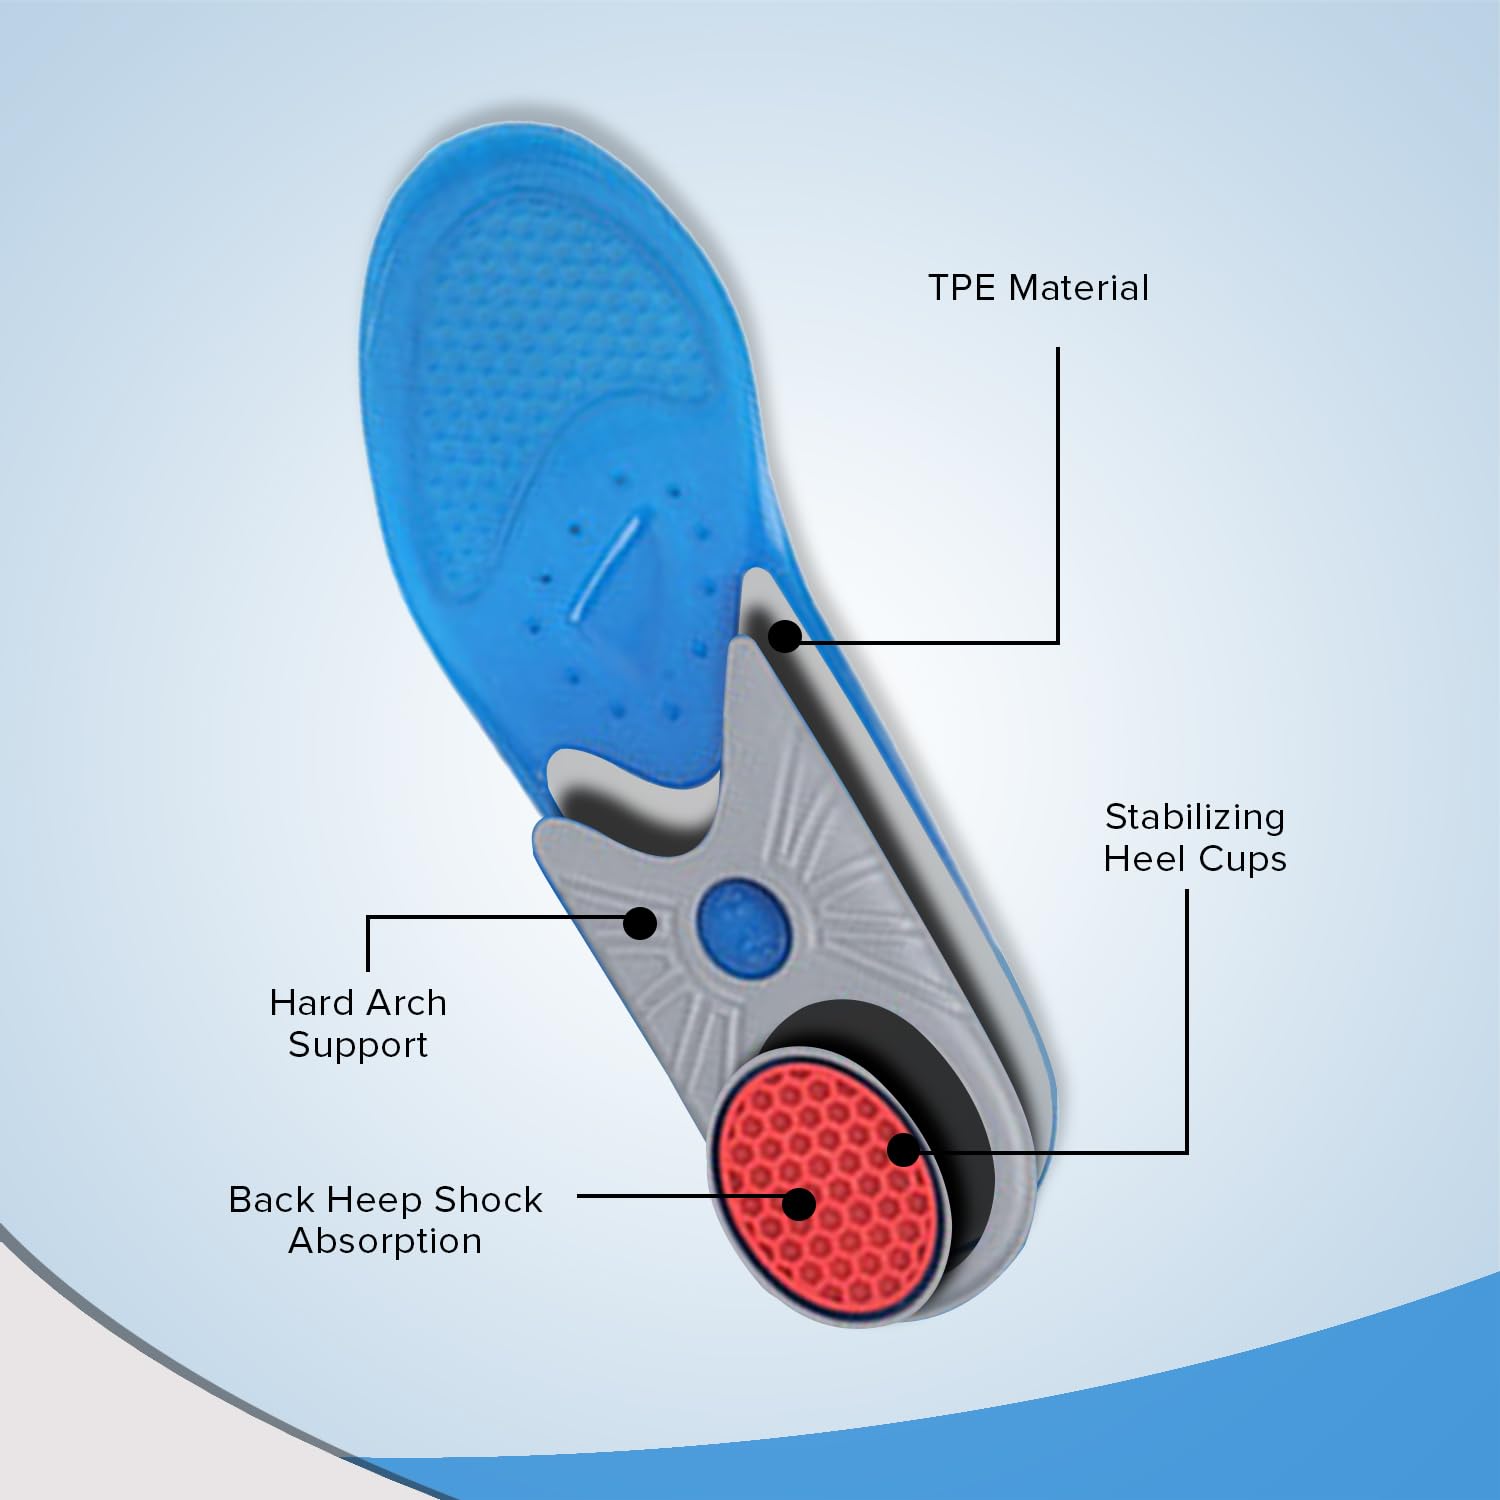 Dr Foot Orthotics Insole | Heavy Duty Support Insoles for Maximum Comfort and Stability | With Shock Absorption | All Day Comfort in Casual Shoes, Sneakers | For Men & Women - 1 Pair (Small Size)